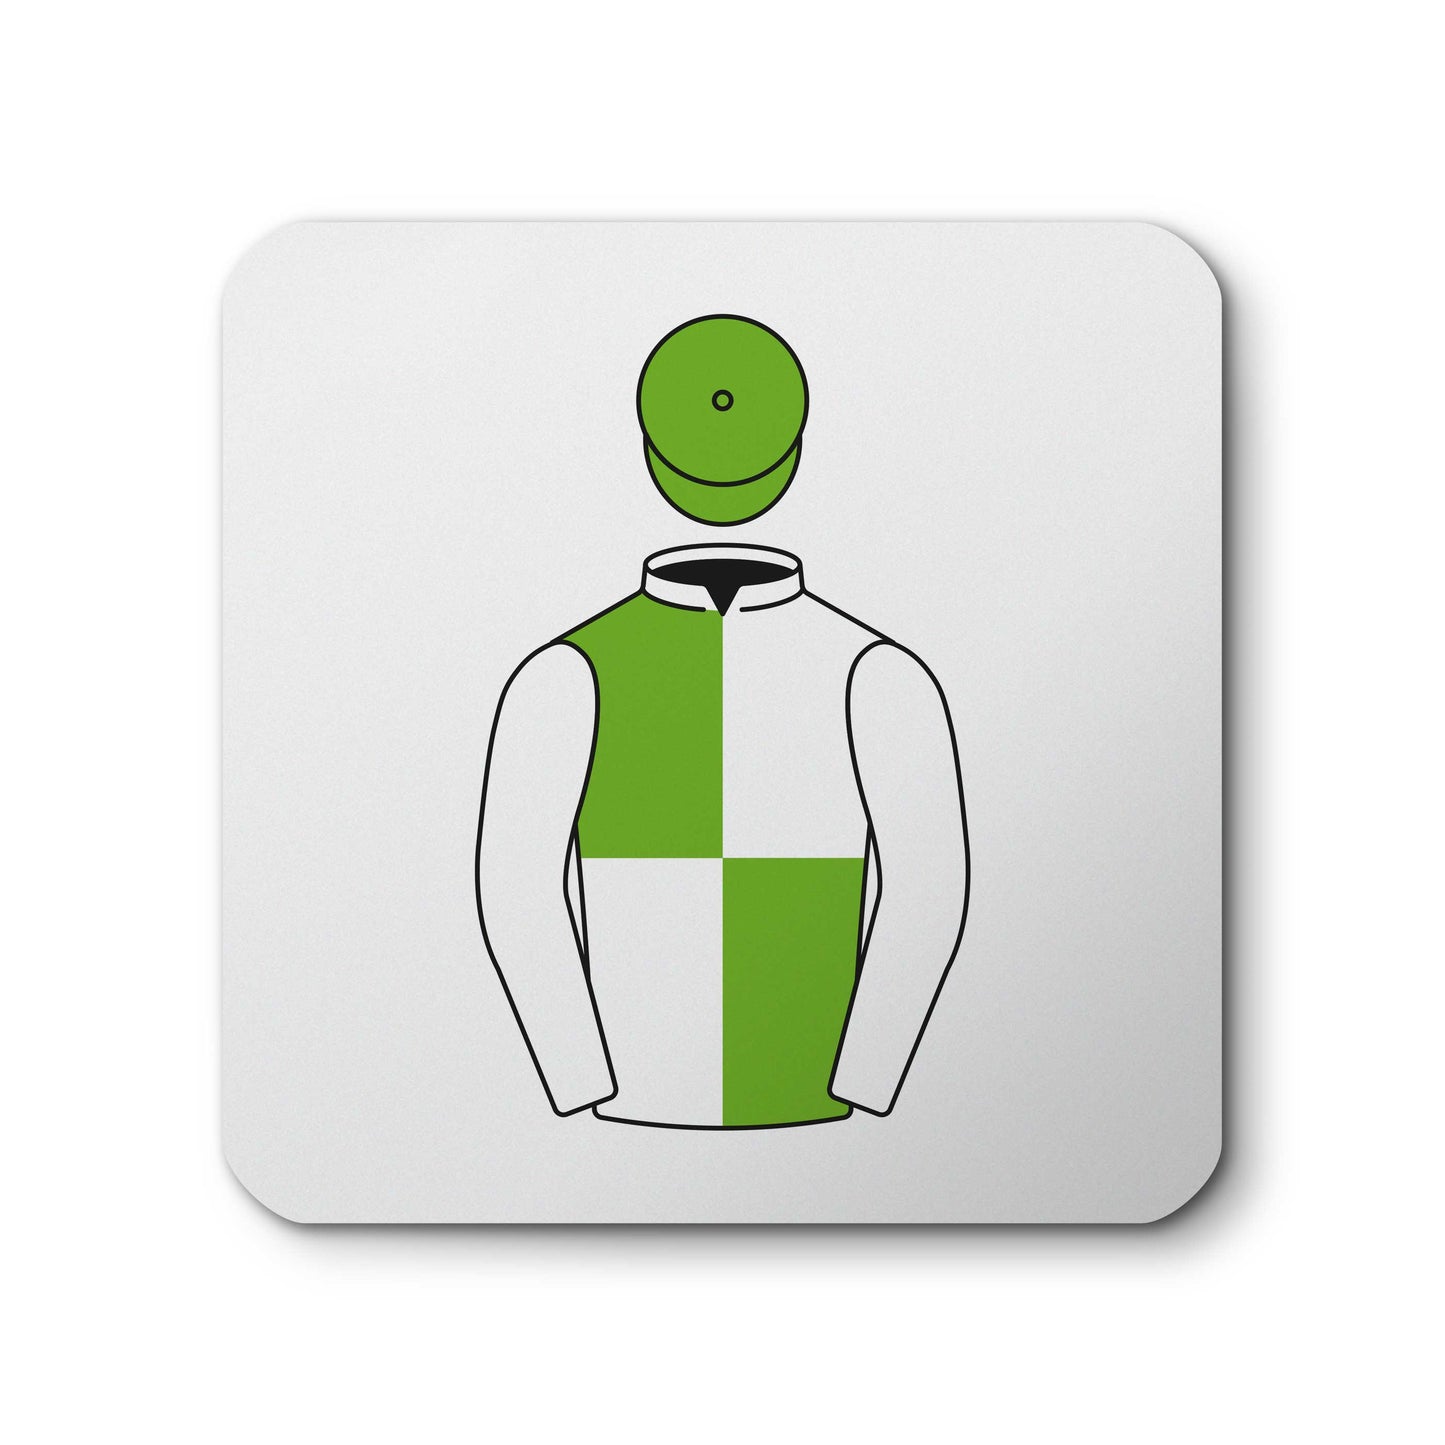 ISL Recruitment Horse Racing Coaster - Hacked Up Horse Racing Gifts